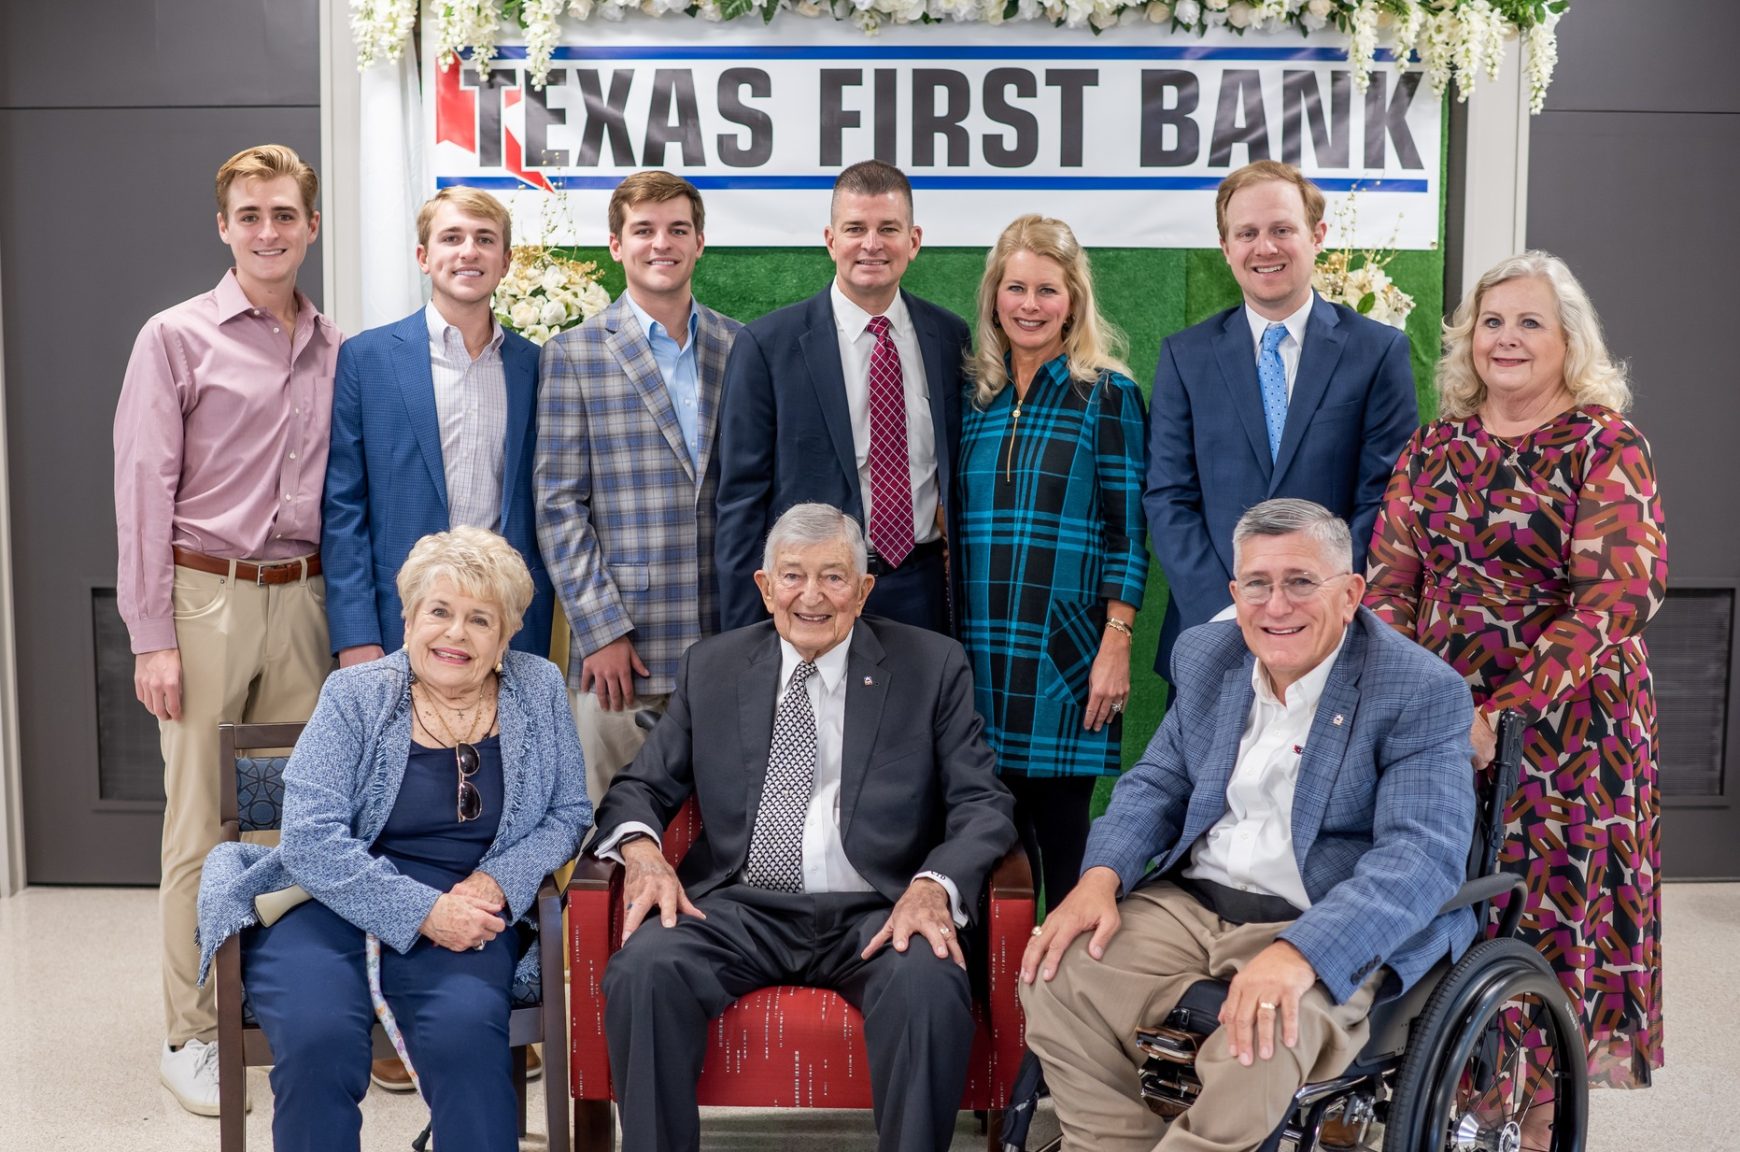 About Texas First Bank